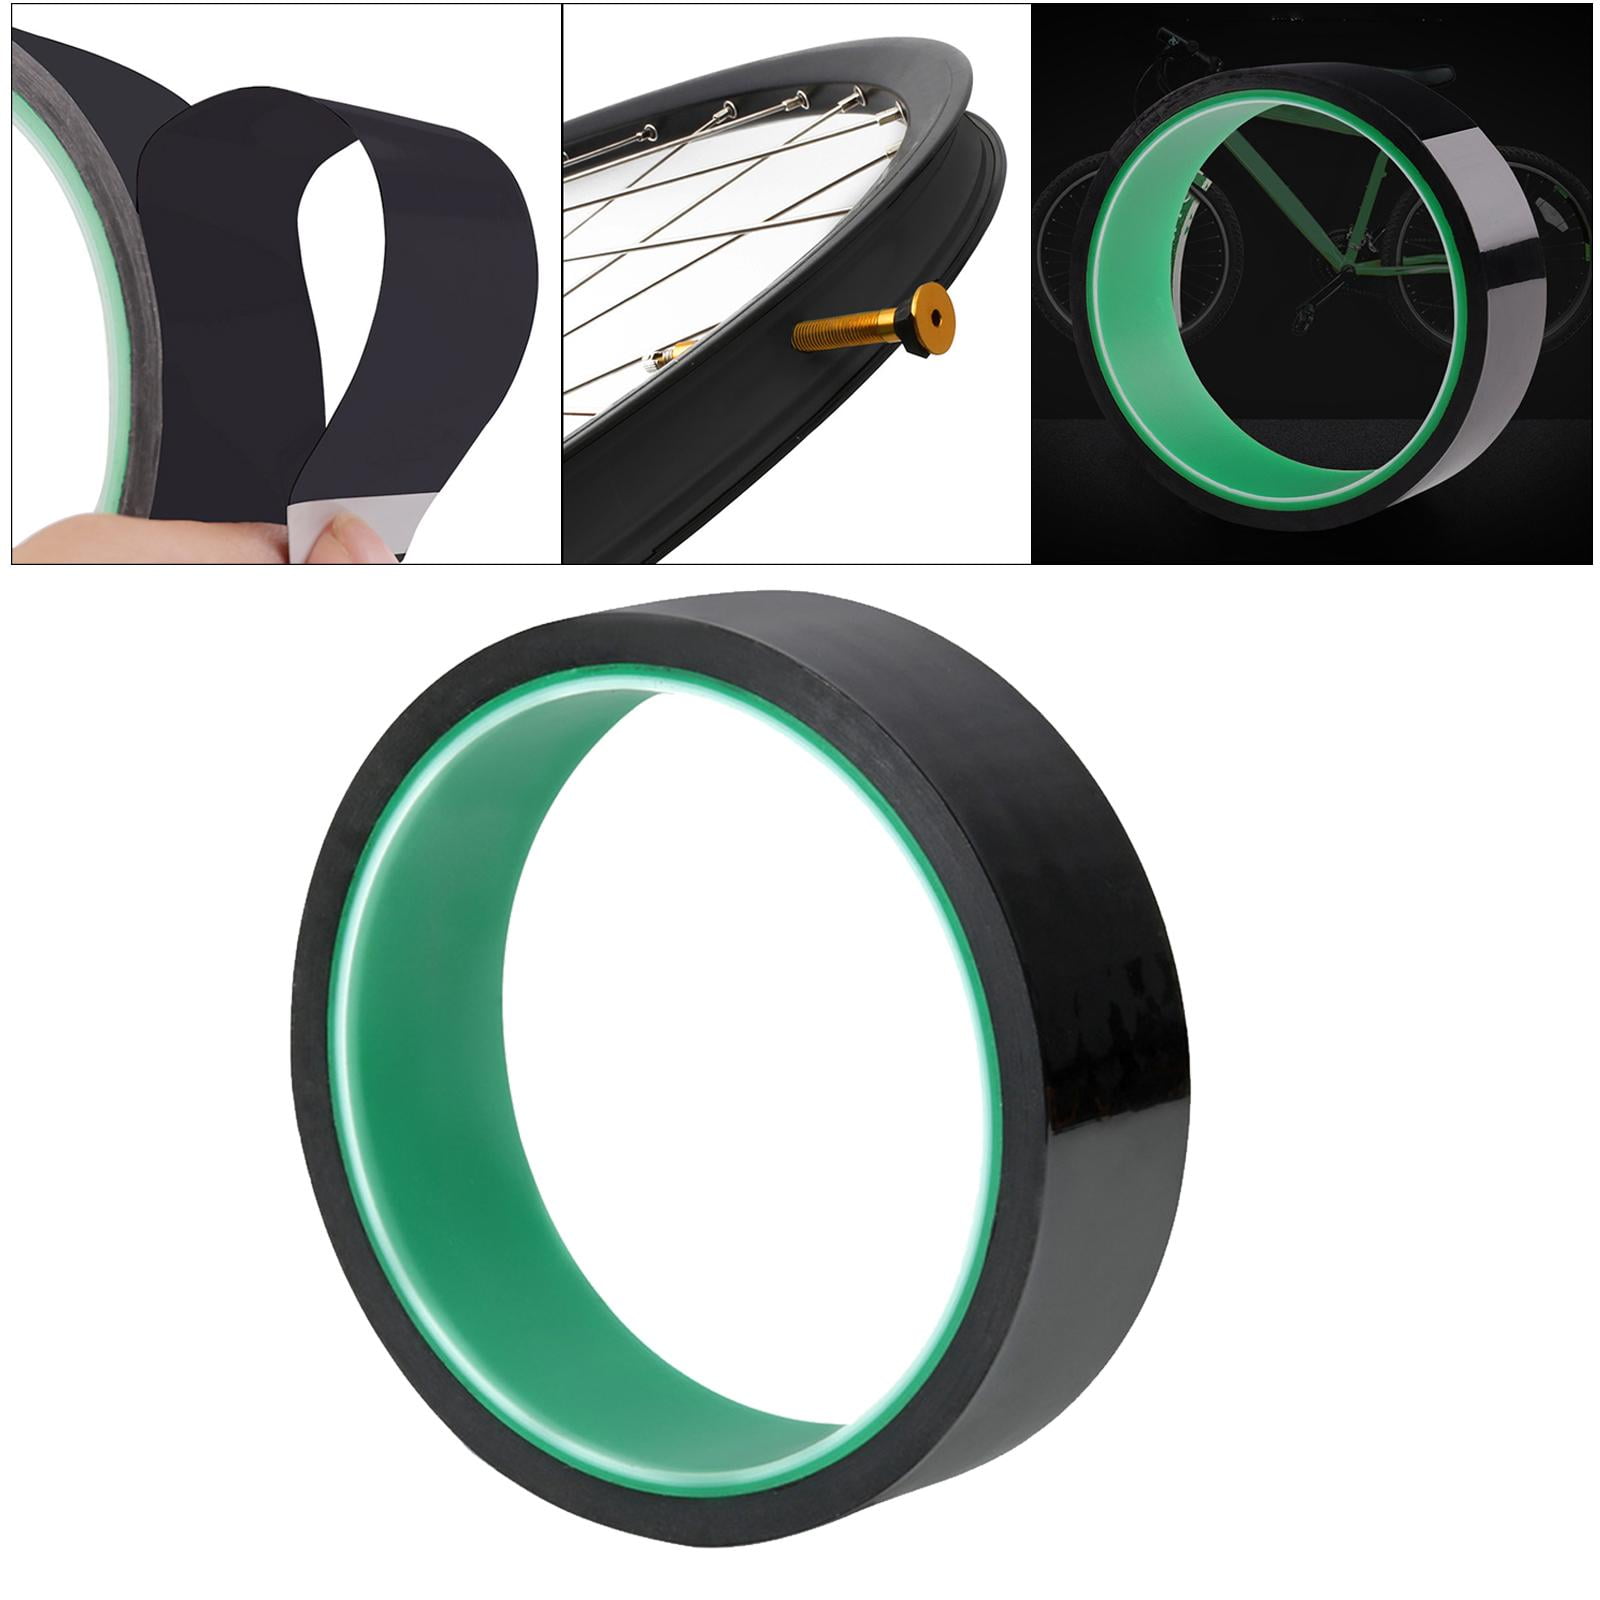 Rim Tape Strips 33ft Length Fancyes Hold Fast Bicycle Tubeless Rim Tape Bike Accessories for 2 Bikes 